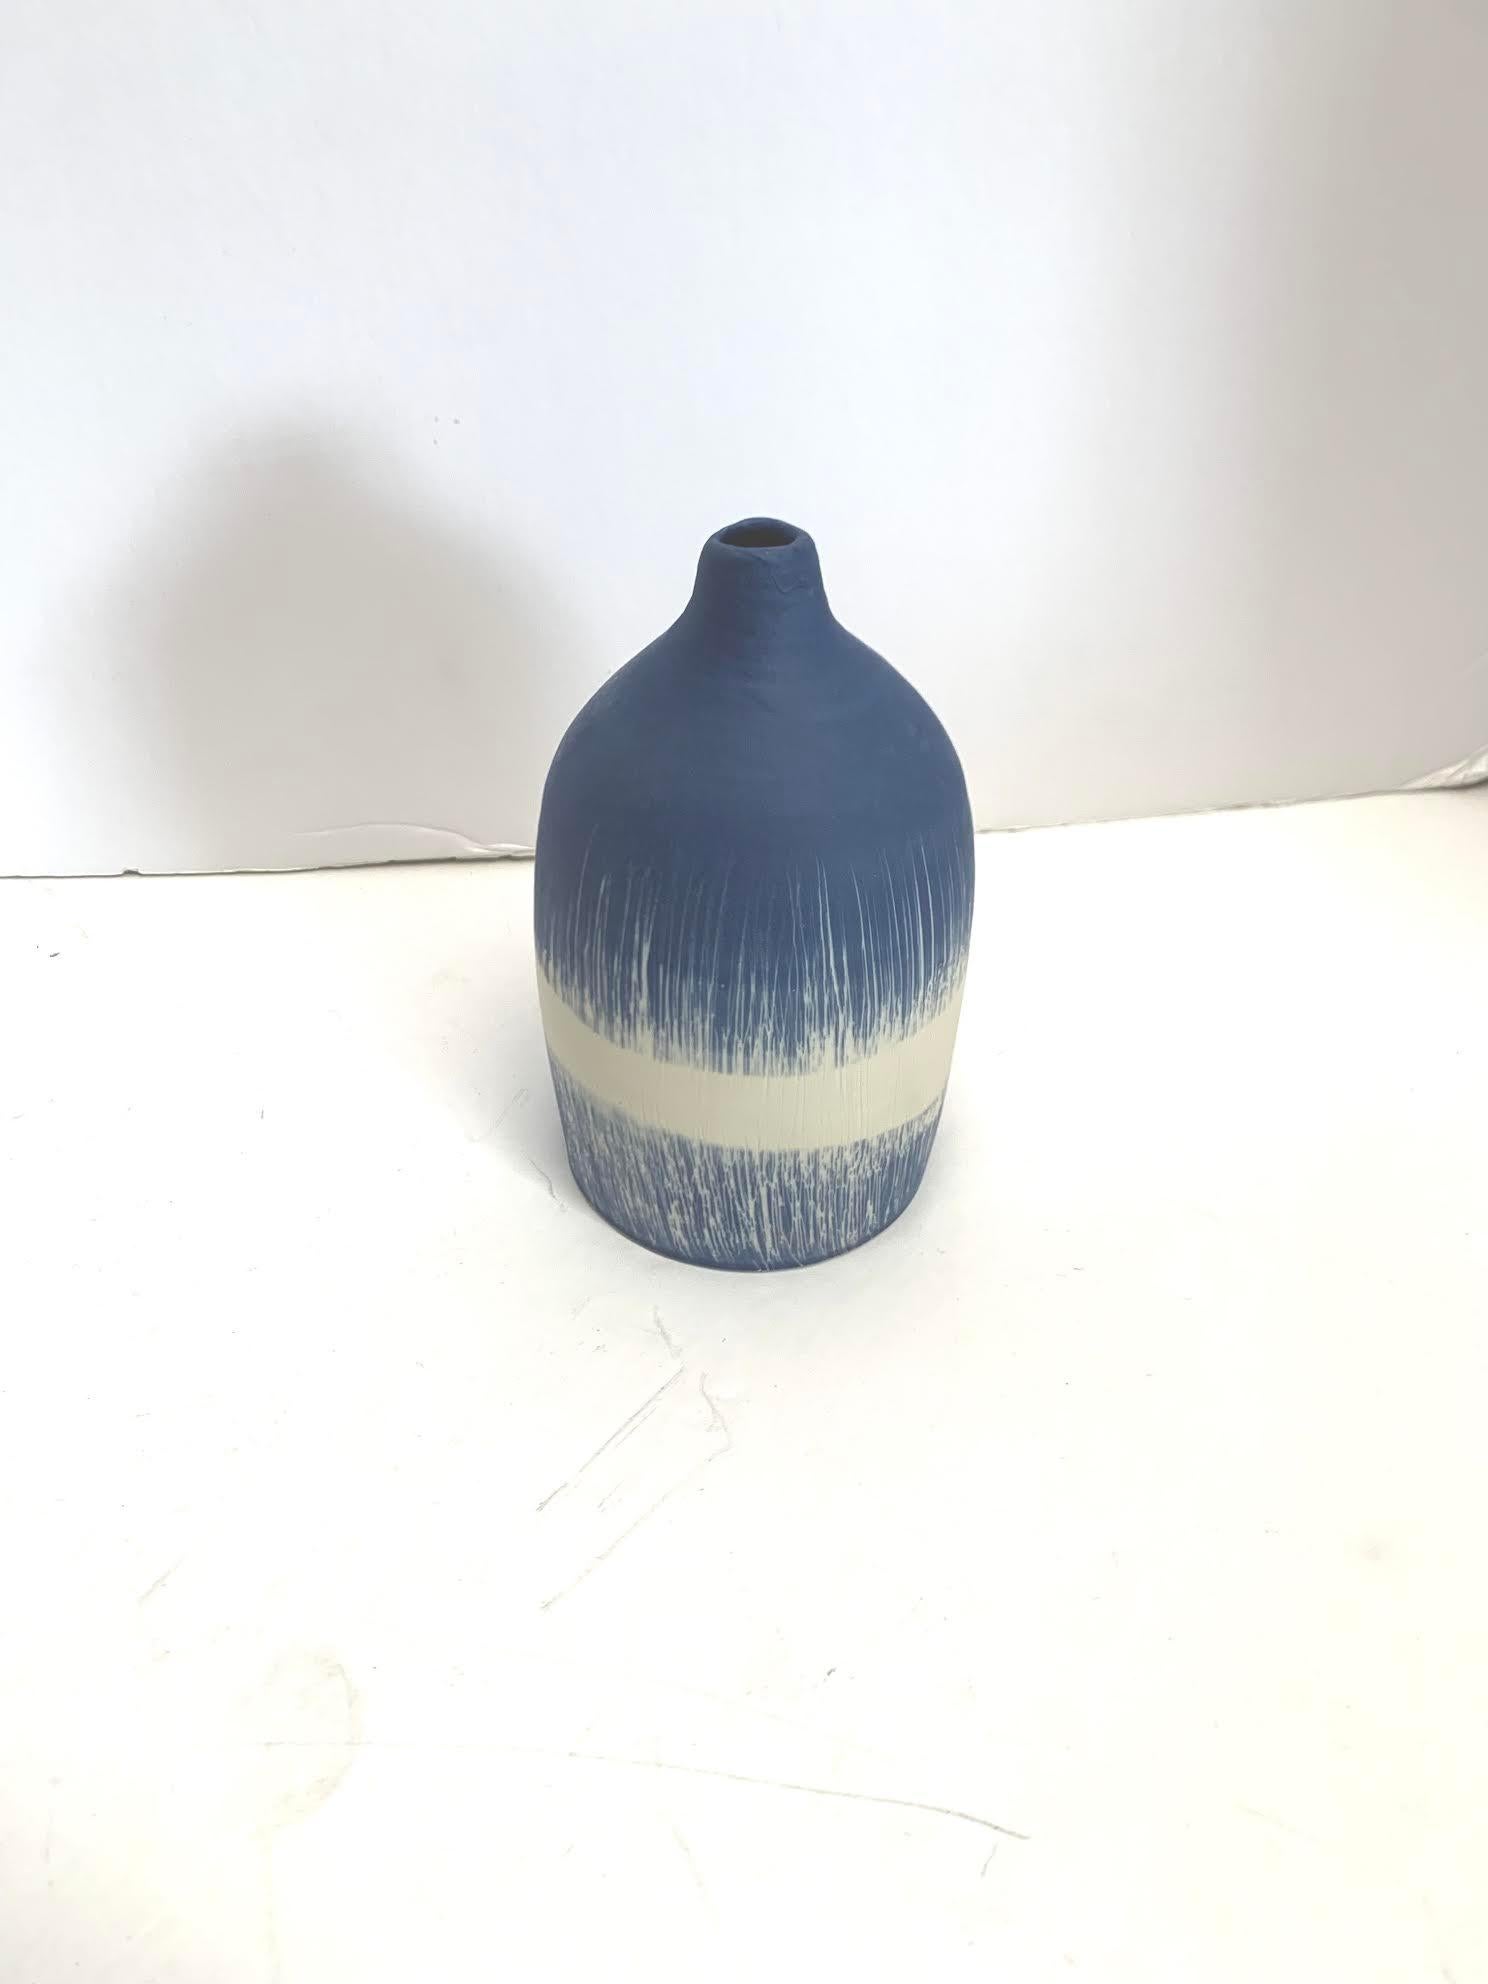 Contemporary Italian hand made ceramic blue ground vase with vertical grass blades and white band design.
Matte glaze.
Part of a large collection of blue and white diminutive vases.
See image #5.